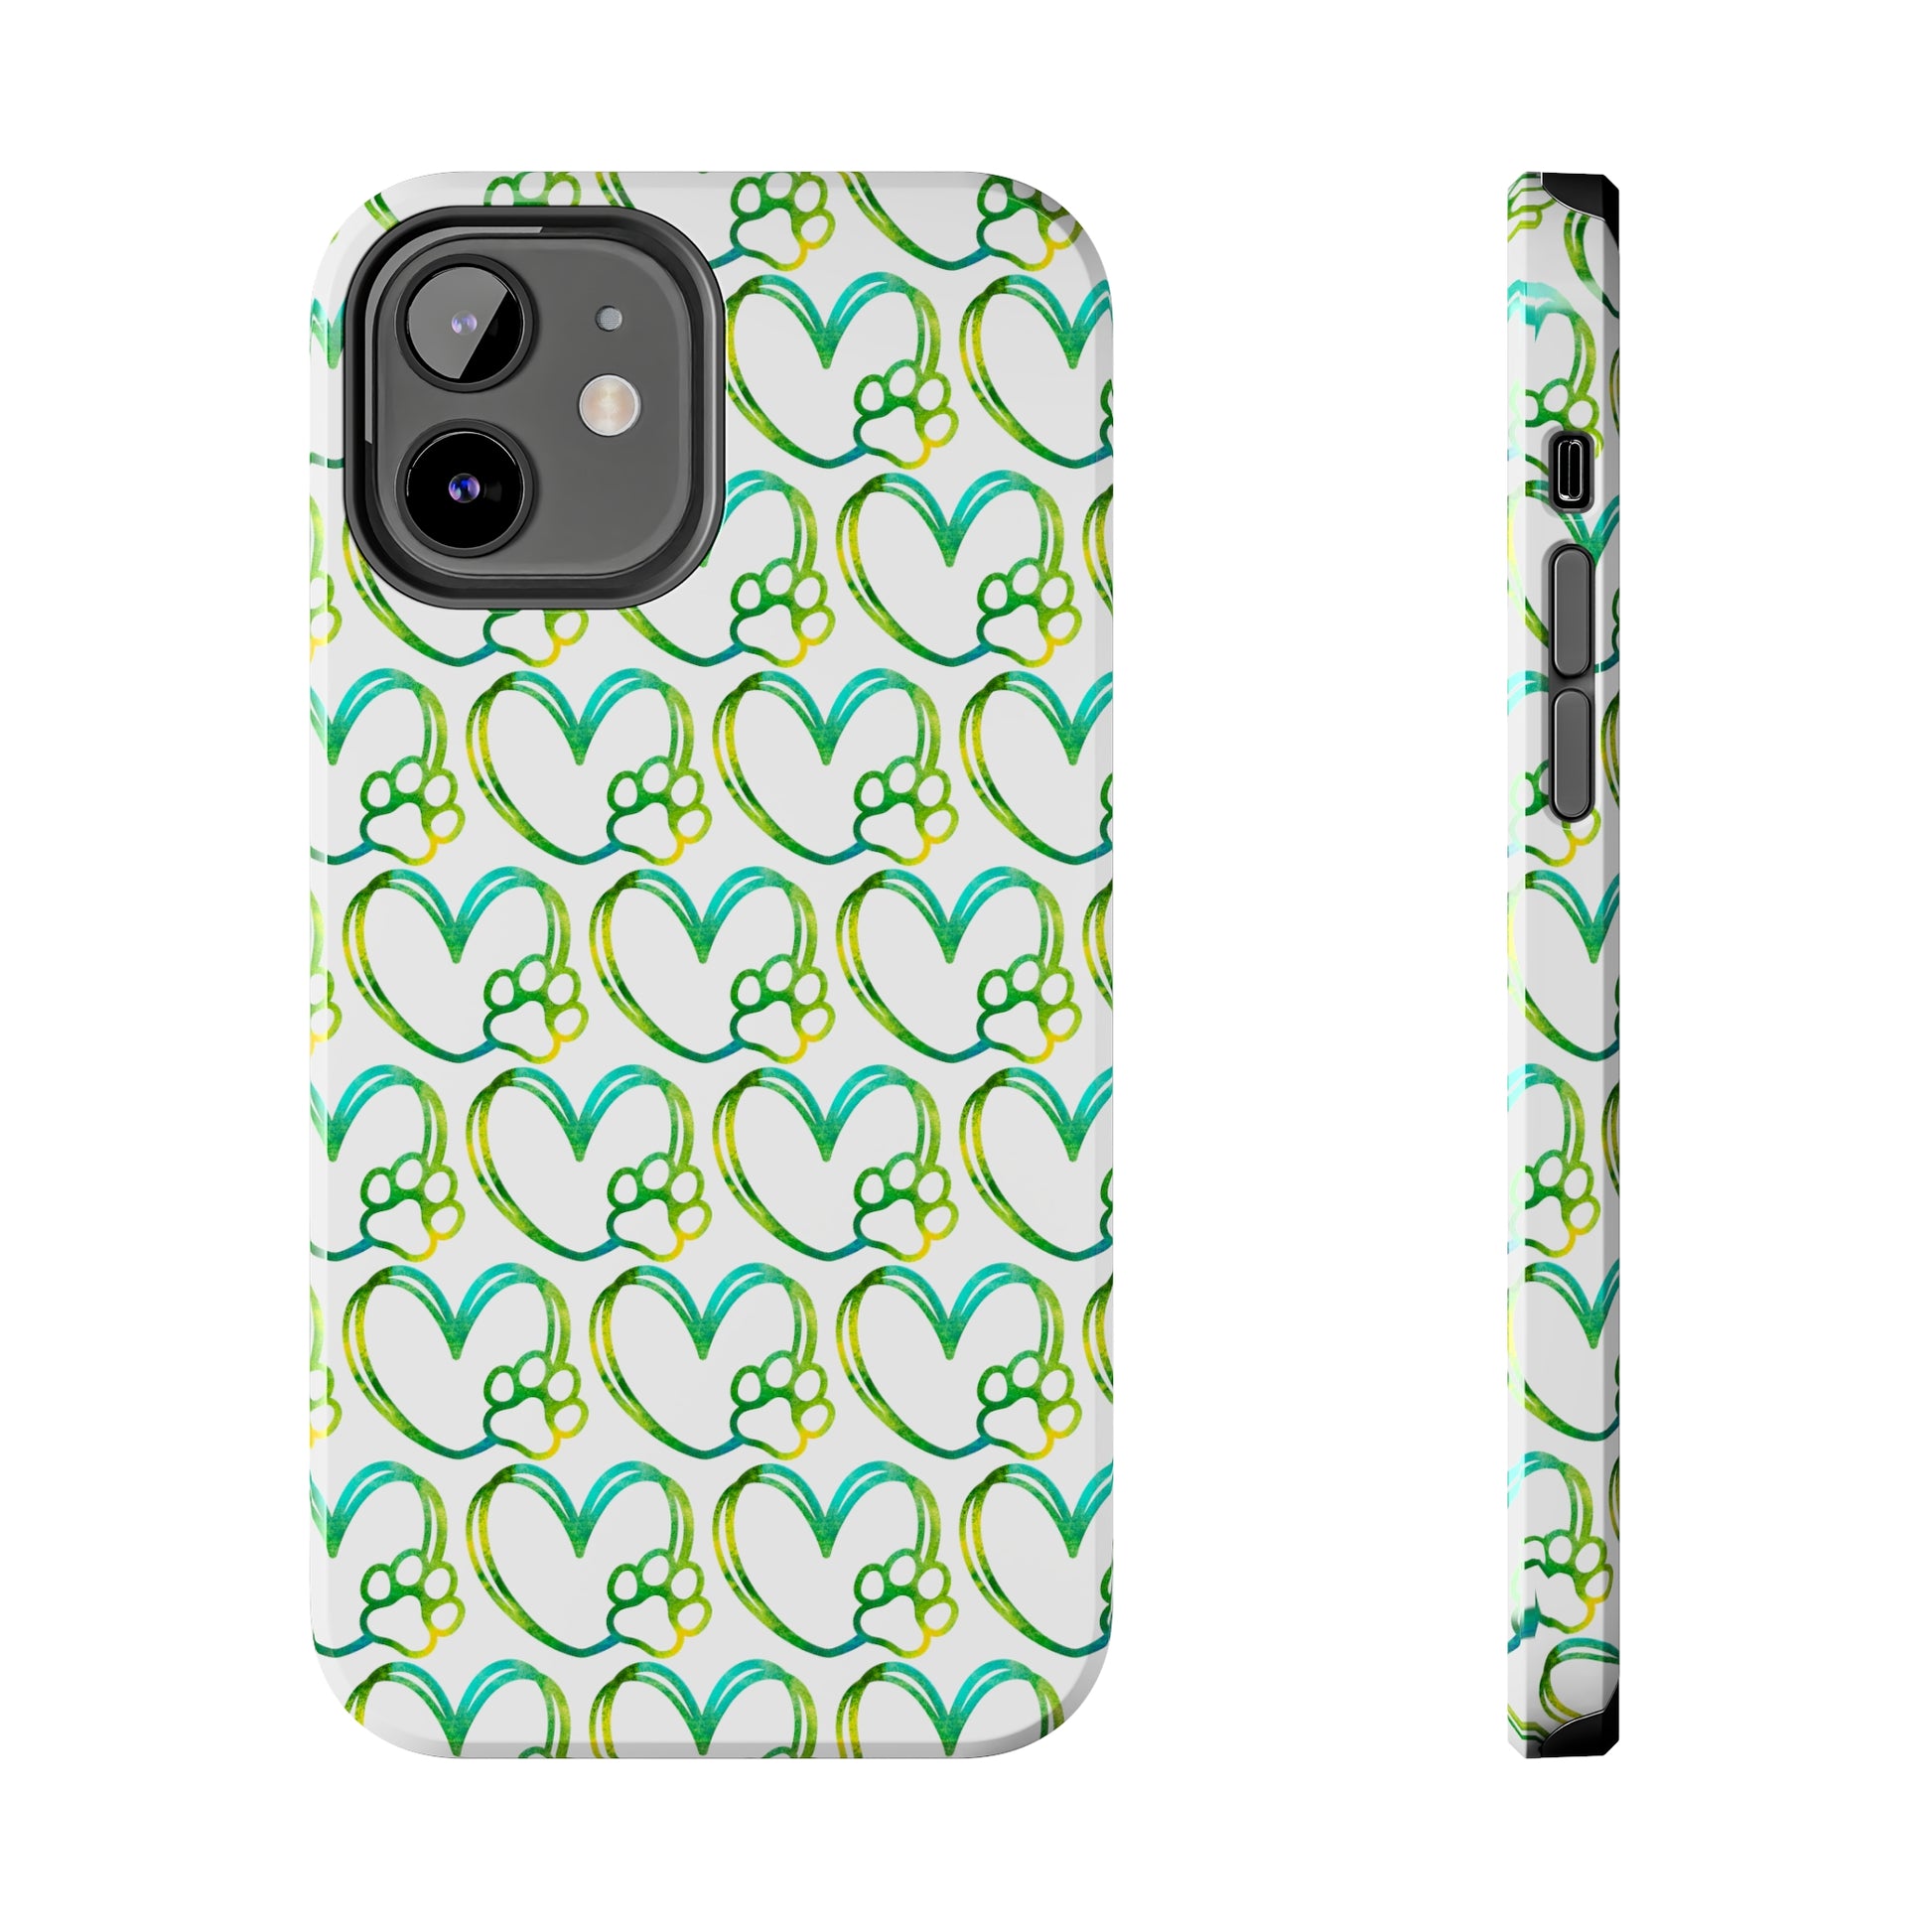 Paw Heart: iPhone Tough Case Design - Wireless Charging - Superior Protection - Original Graphics by TheGlassyLass.com